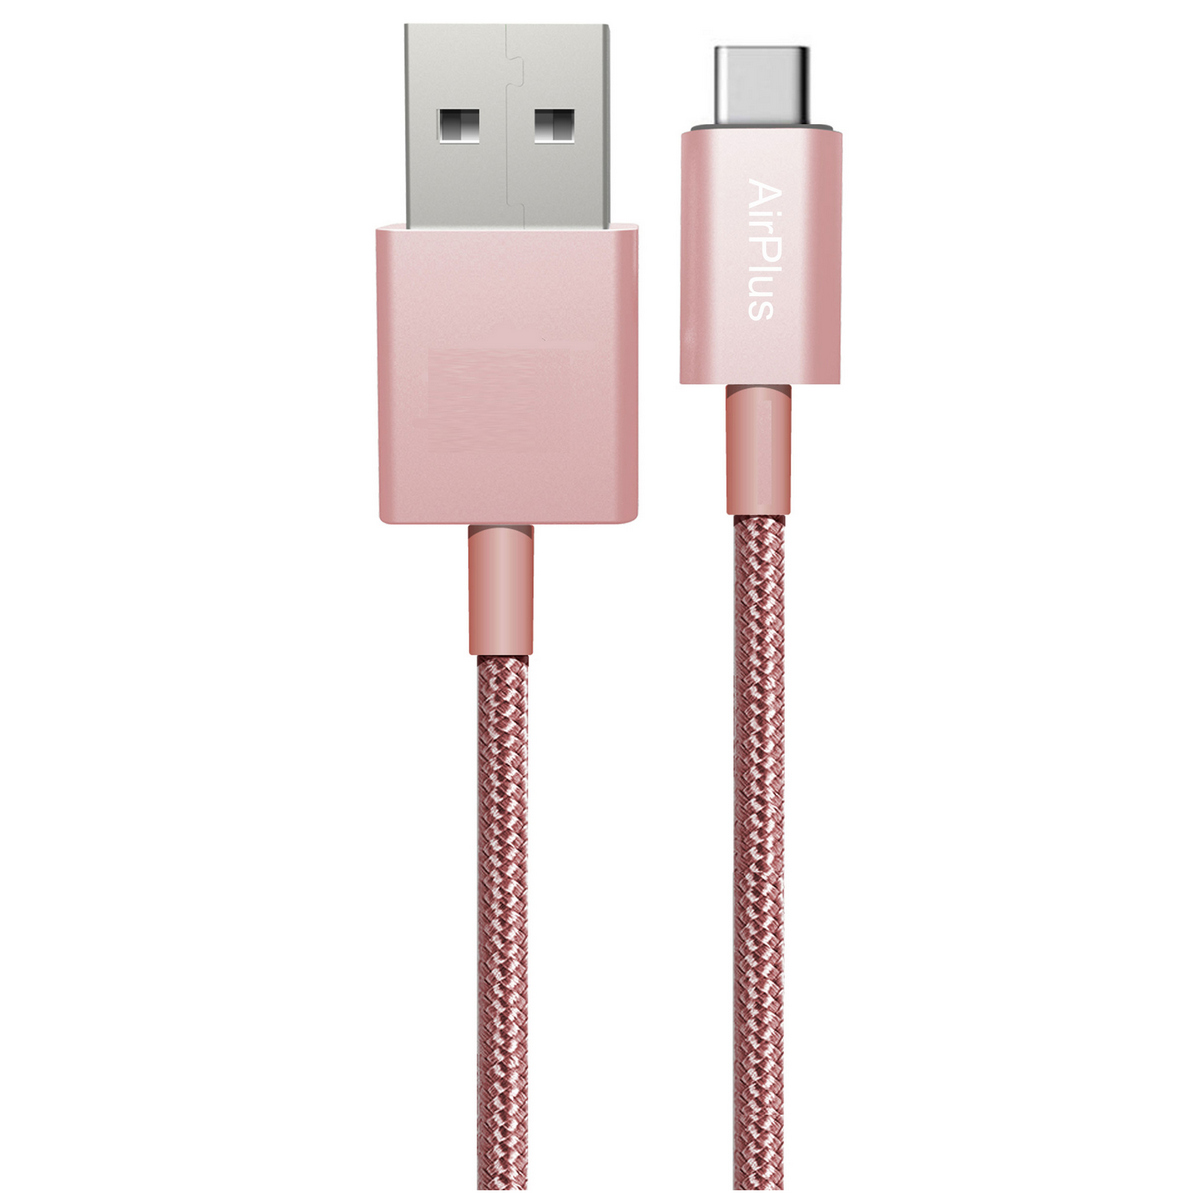 AIR PLUS USB Type C to USB Cable (1M,Rose Gold) APUC004